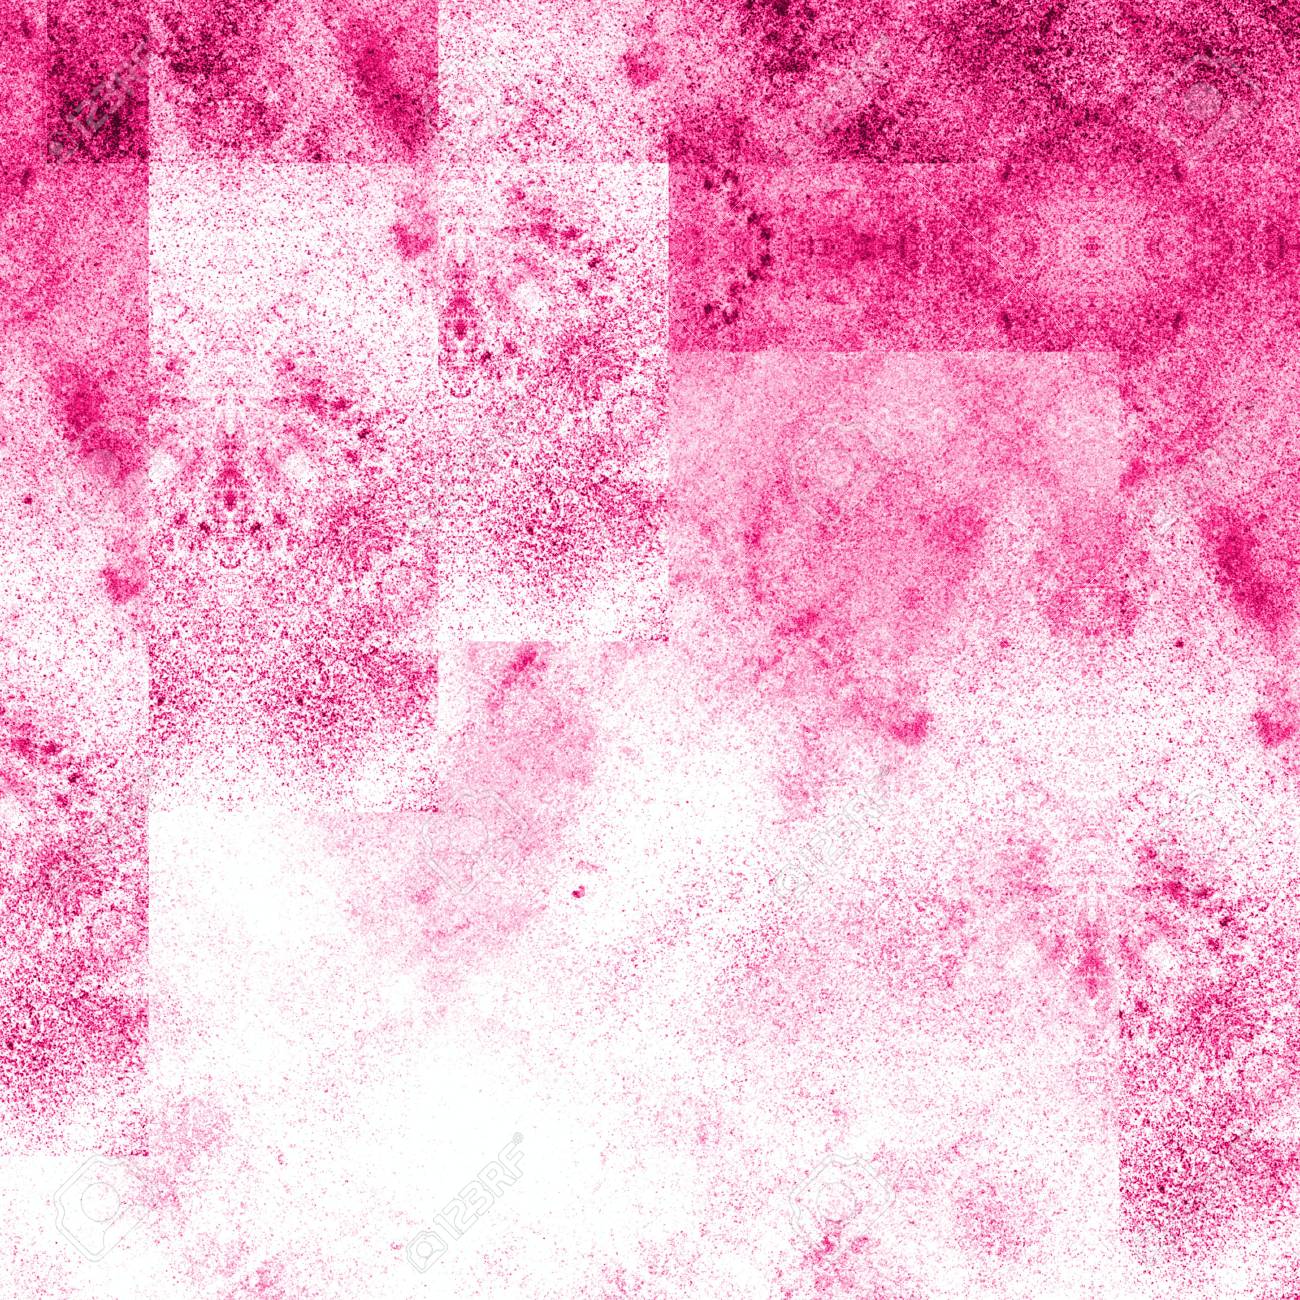 Grunge Background In Pink And White Color Abstract